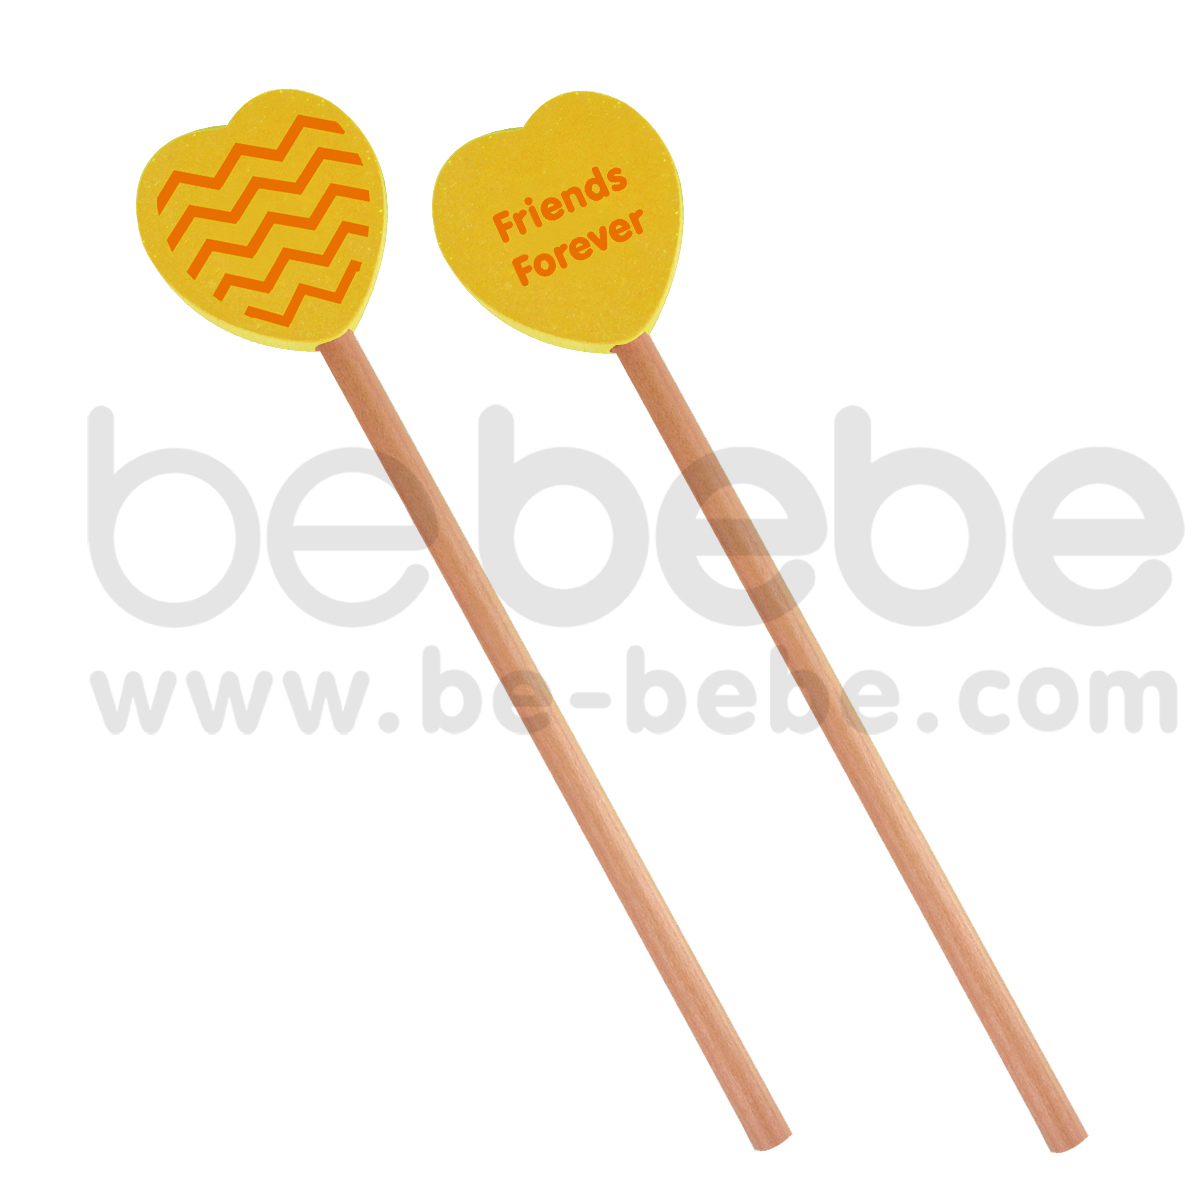 bebebe : Pencil-L-Hearts-Friends Forever/Yellow